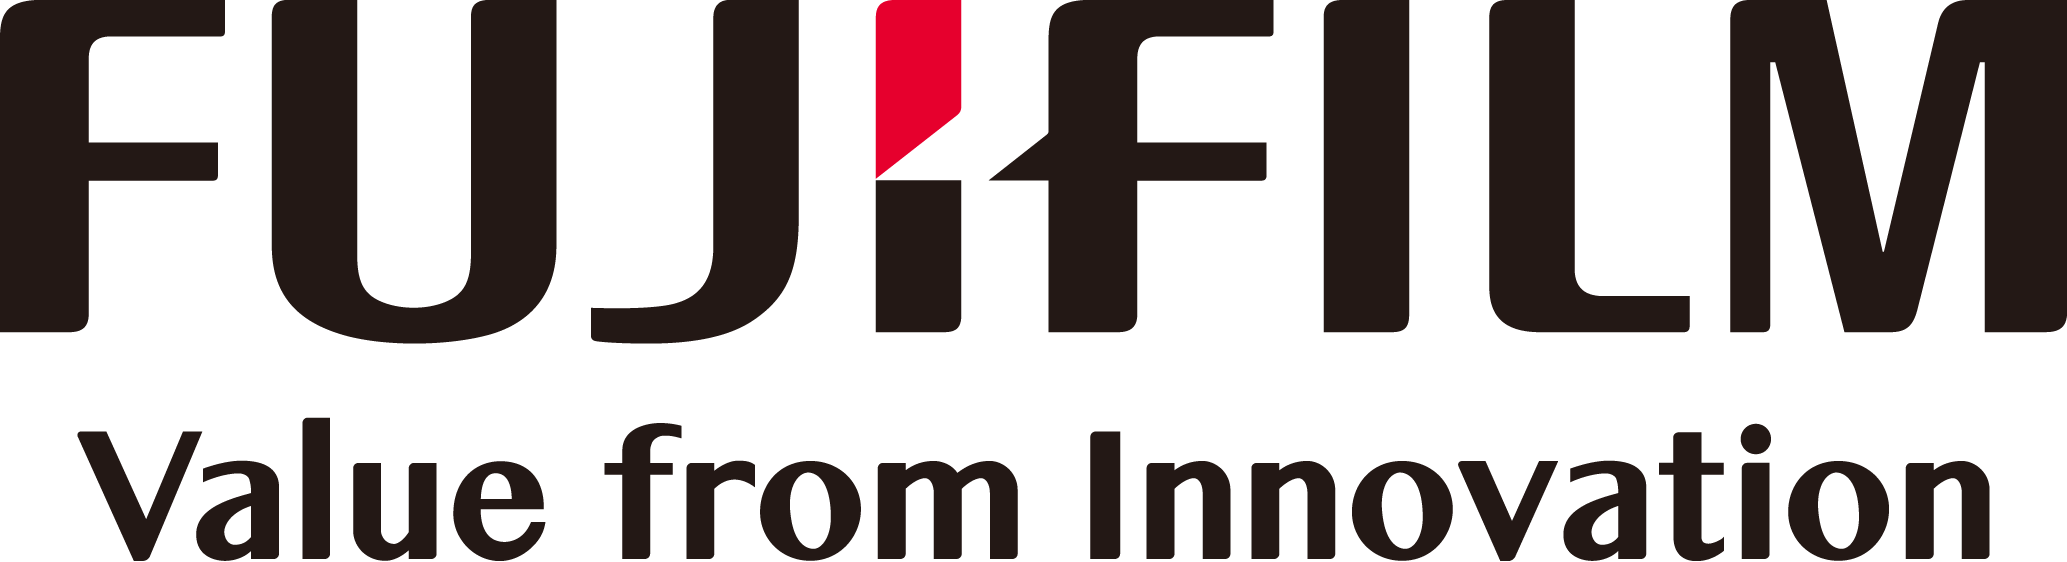 FUJIFILM Business Innovation, Leading Business Communication and Contributing to Customer Growth | FUJIFILM Business Innovation Corp.